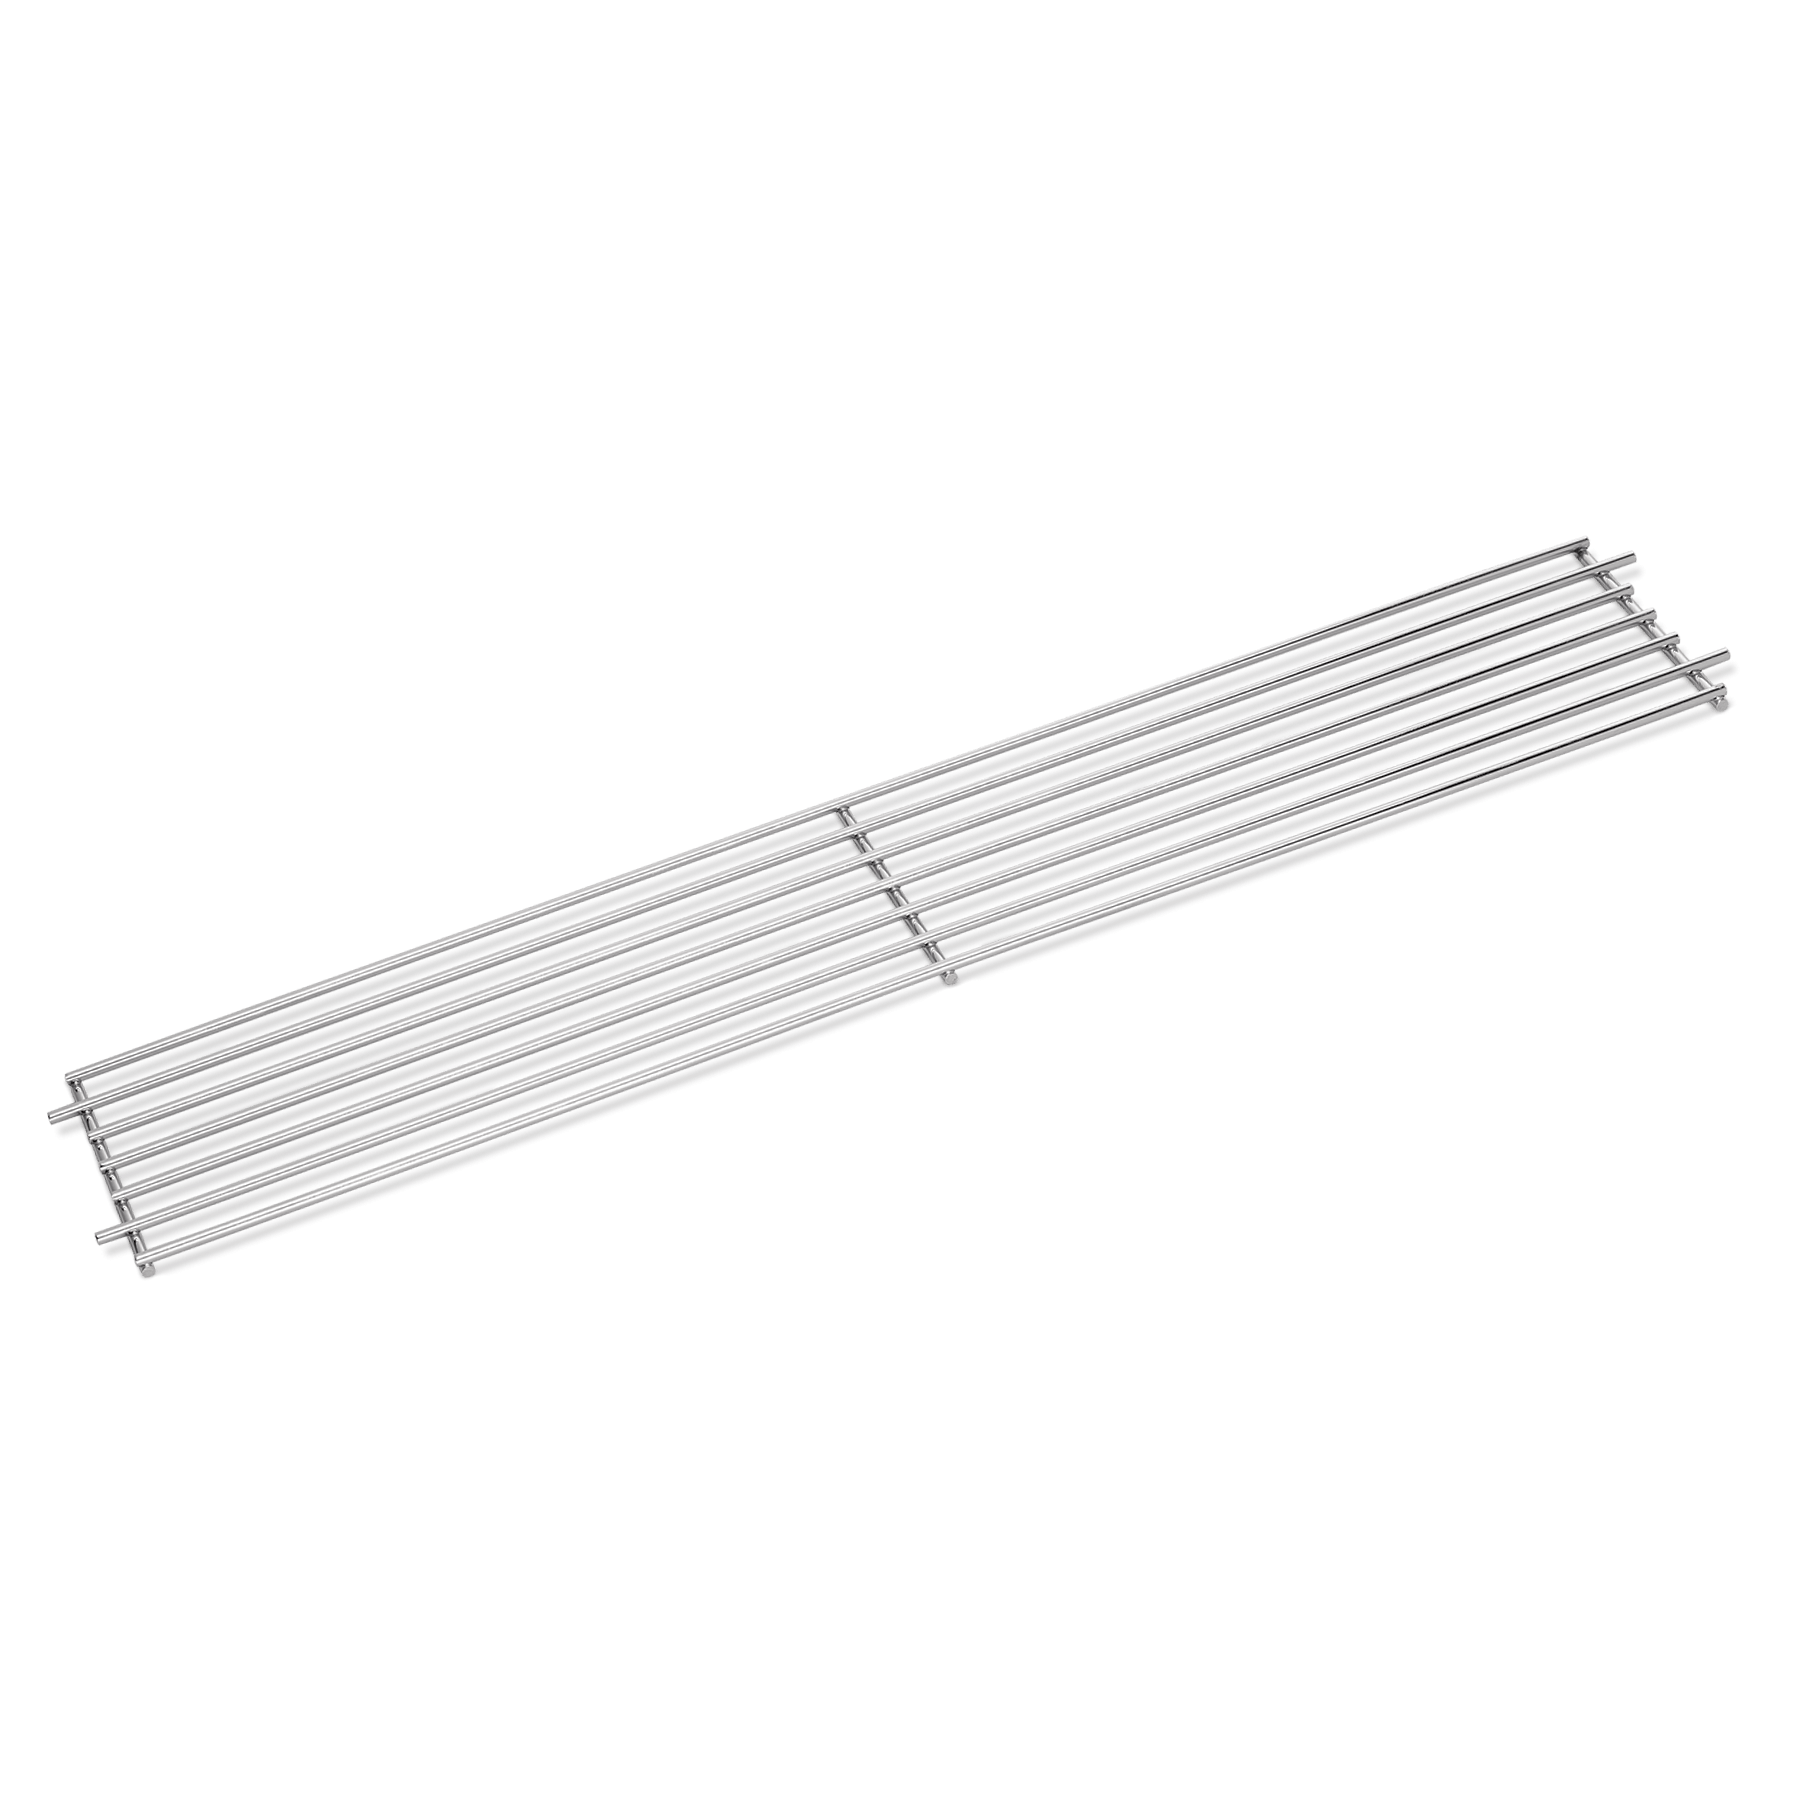 RiversEdge Products Stainless Steel Warming Rack Solid 304 Grade Replacement for Weber 7513 88719